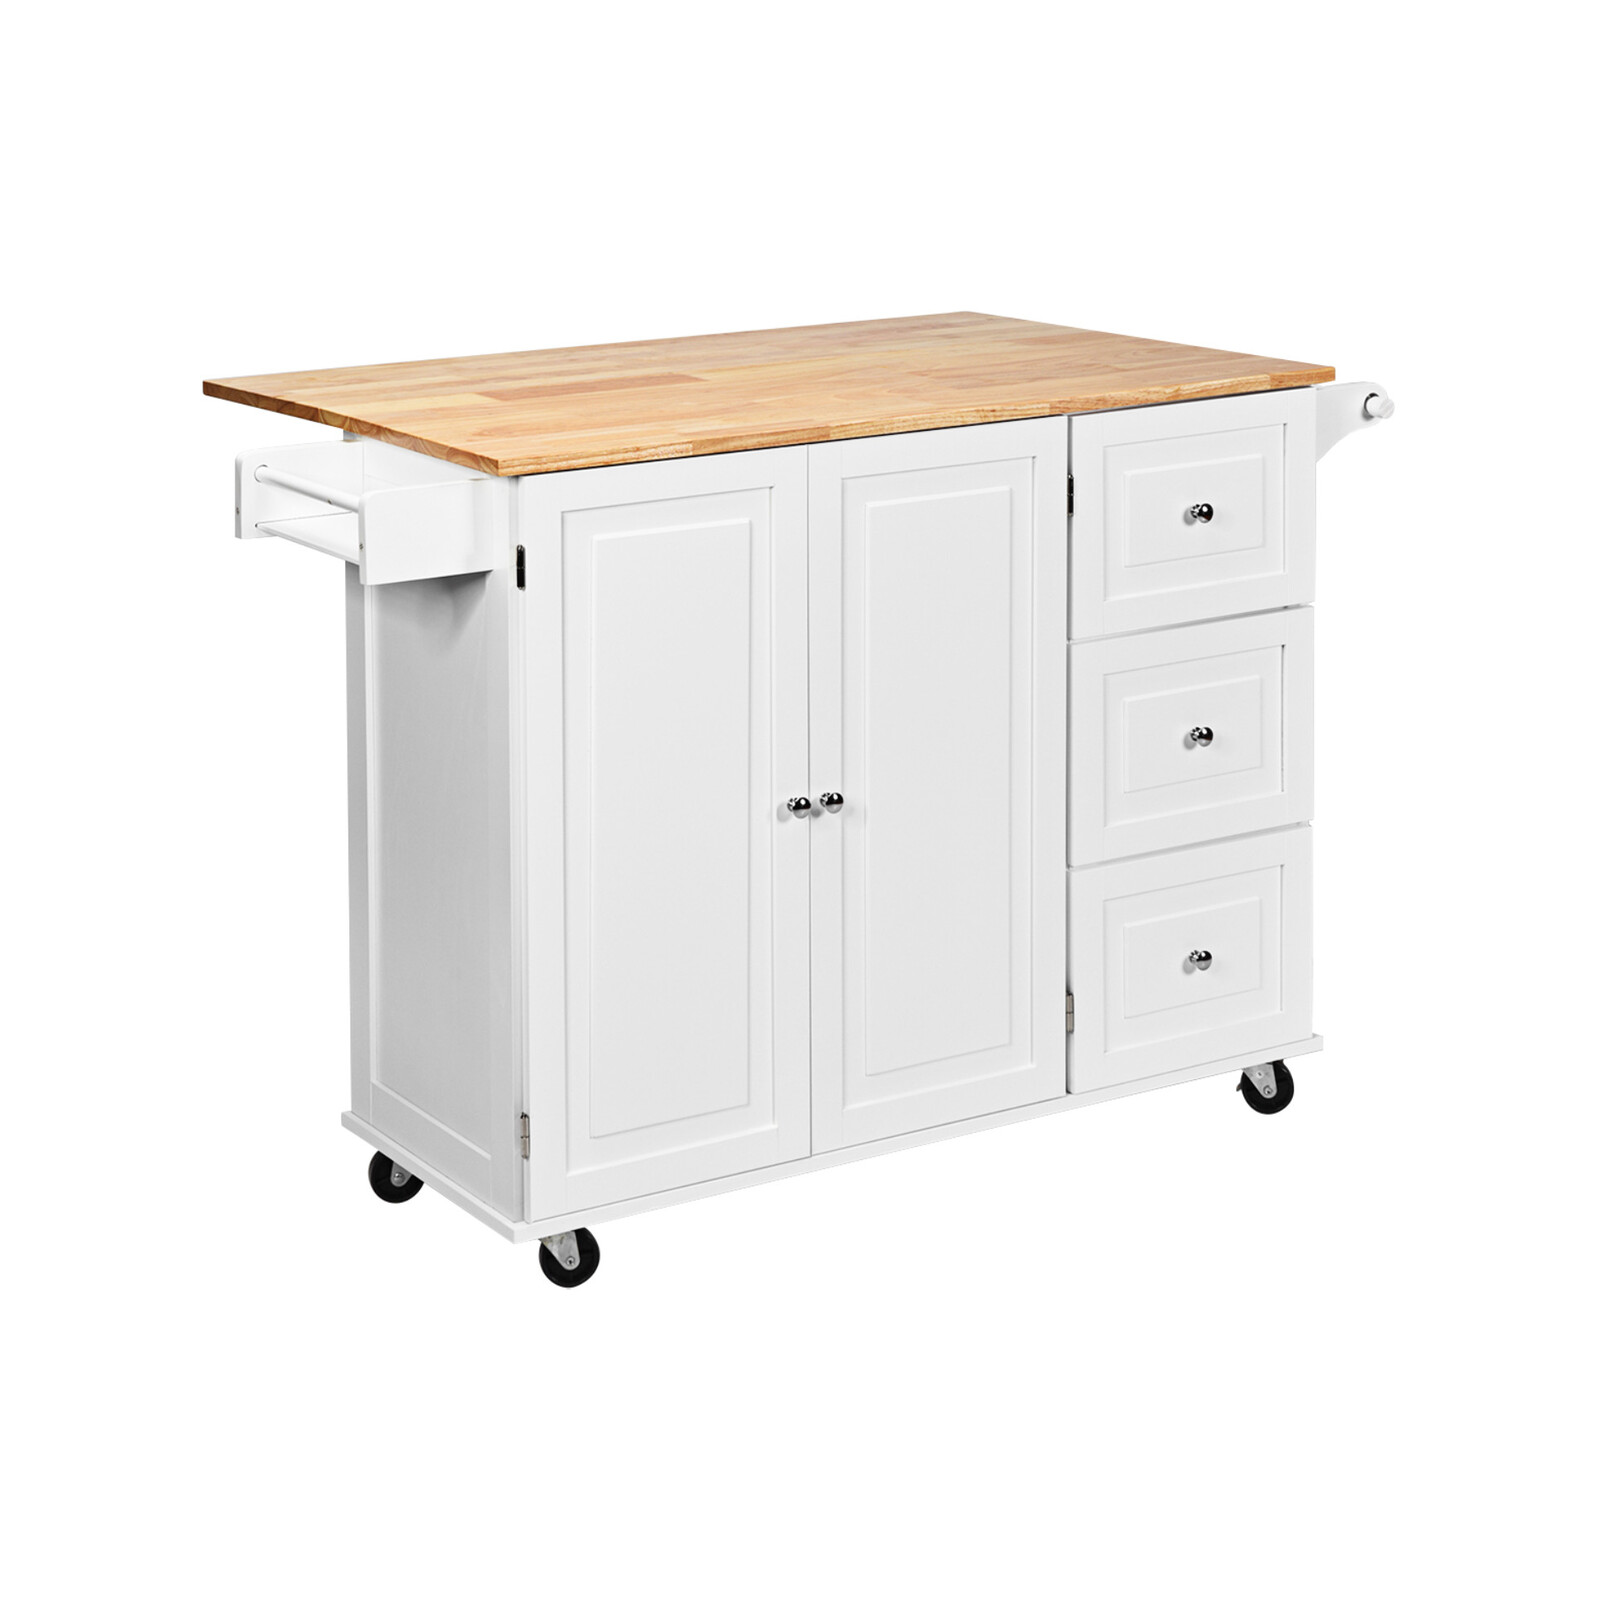 Costway Large Kitchen Island Trolley Extendable Tabletop Rubber Wood w ...